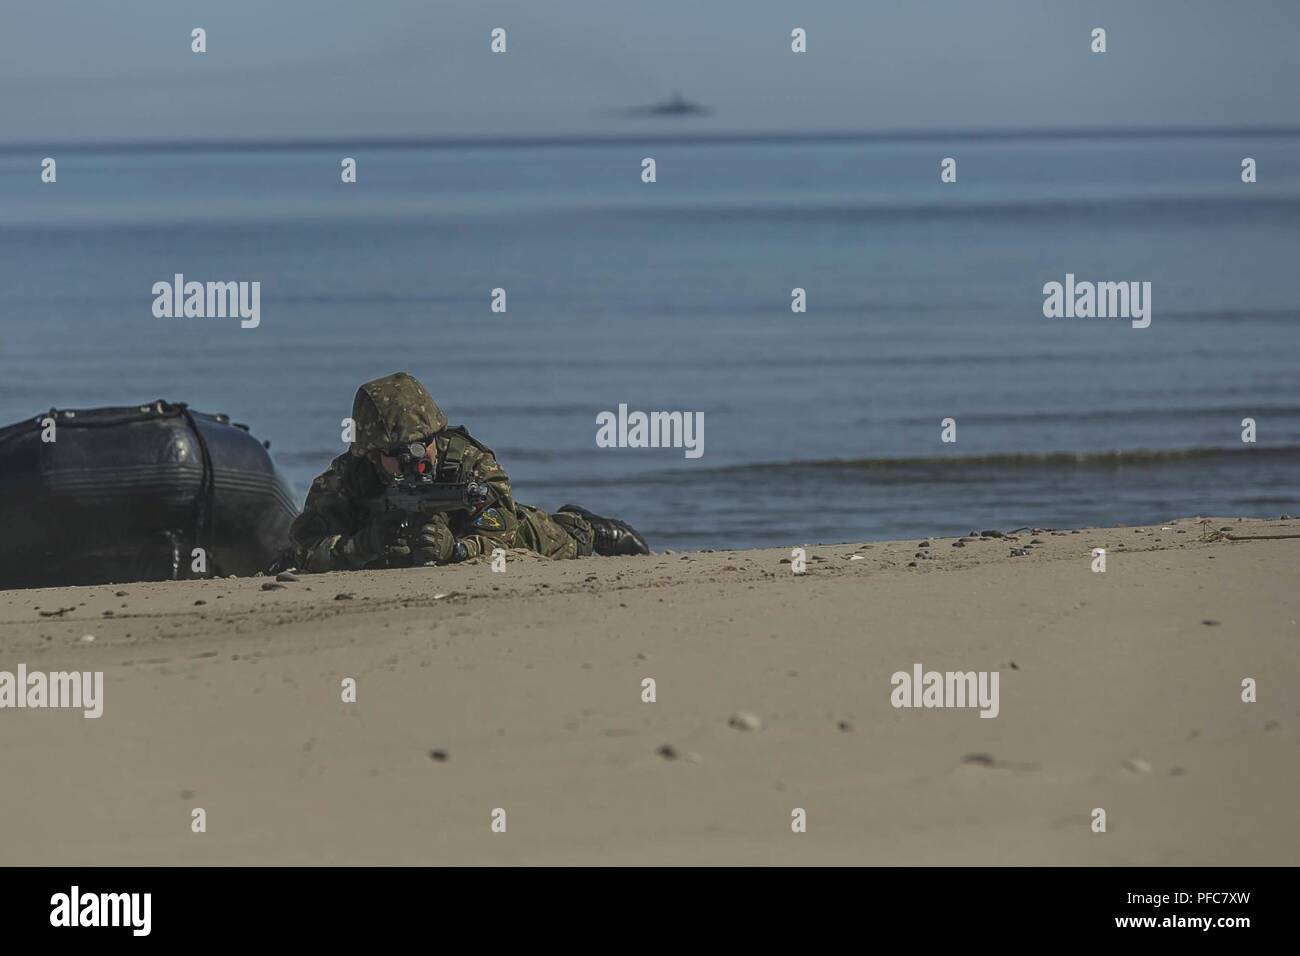 USTKA, Poland (June 8, 2018) A Romanian Marine assigned to the 307th Naval Infantry Battalion, provides security as part of a joint personnel recovery (JPR) training scenario during exercise Baltic Operations (BALTOPS) 2018 Ustka, Poland, June 8. BALTOPS is the premier annual maritime-focused exercise in the Baltic region and one of the largest exercises in Northern Europe enhancing flexibility and interoperability among allied and partner nations. Stock Photo